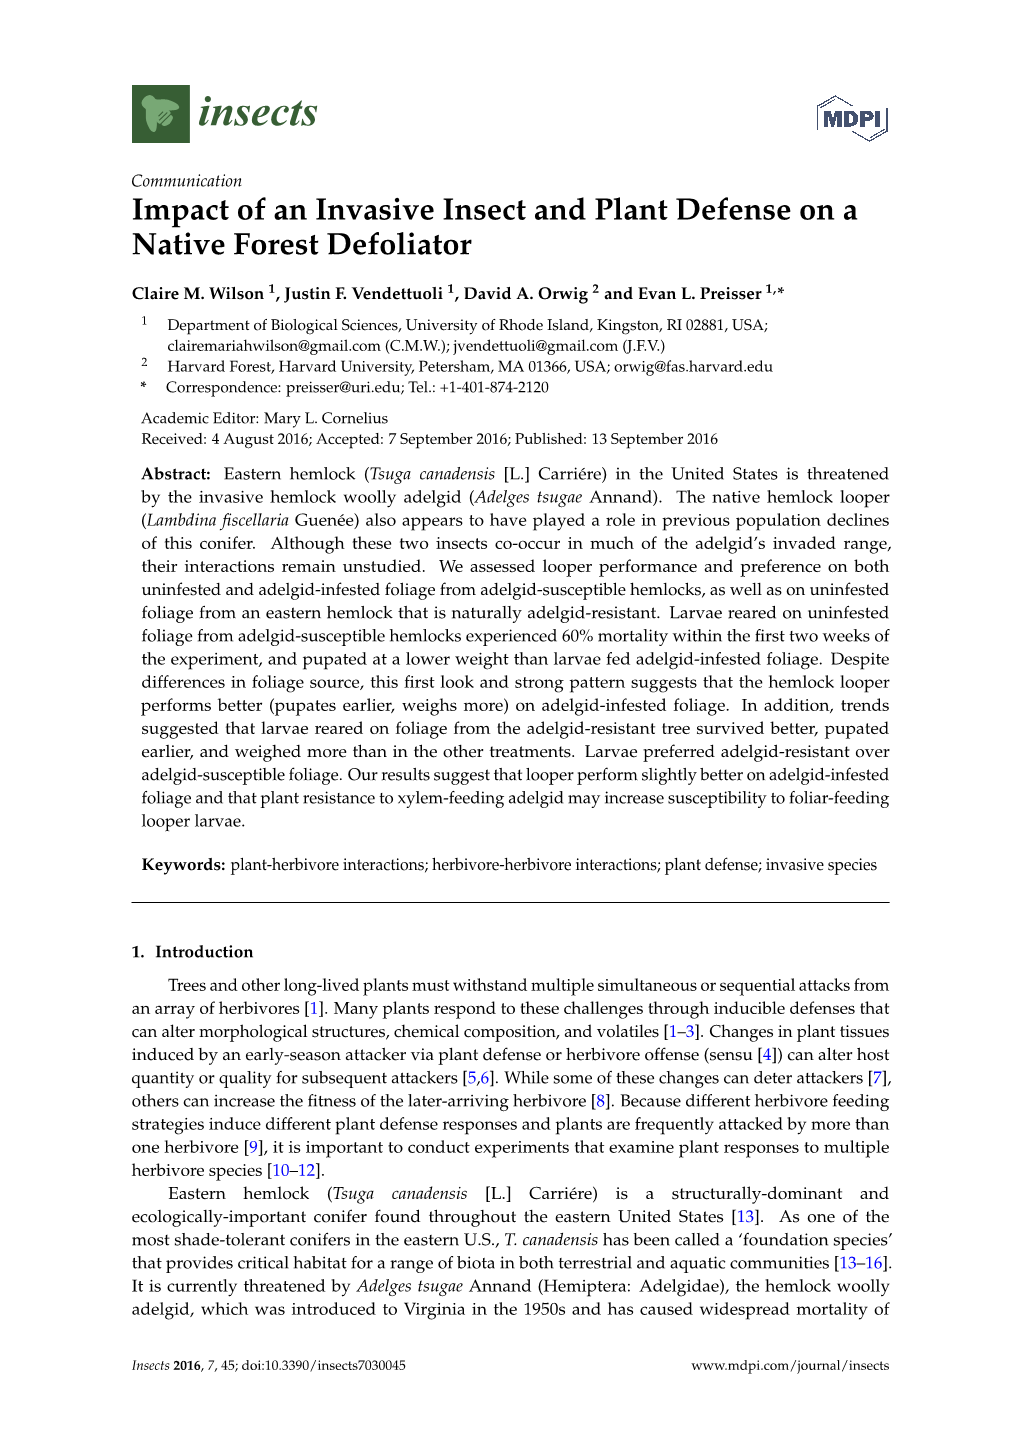 Impact of an Invasive Insect and Plant Defense on a Native Forest Defoliator